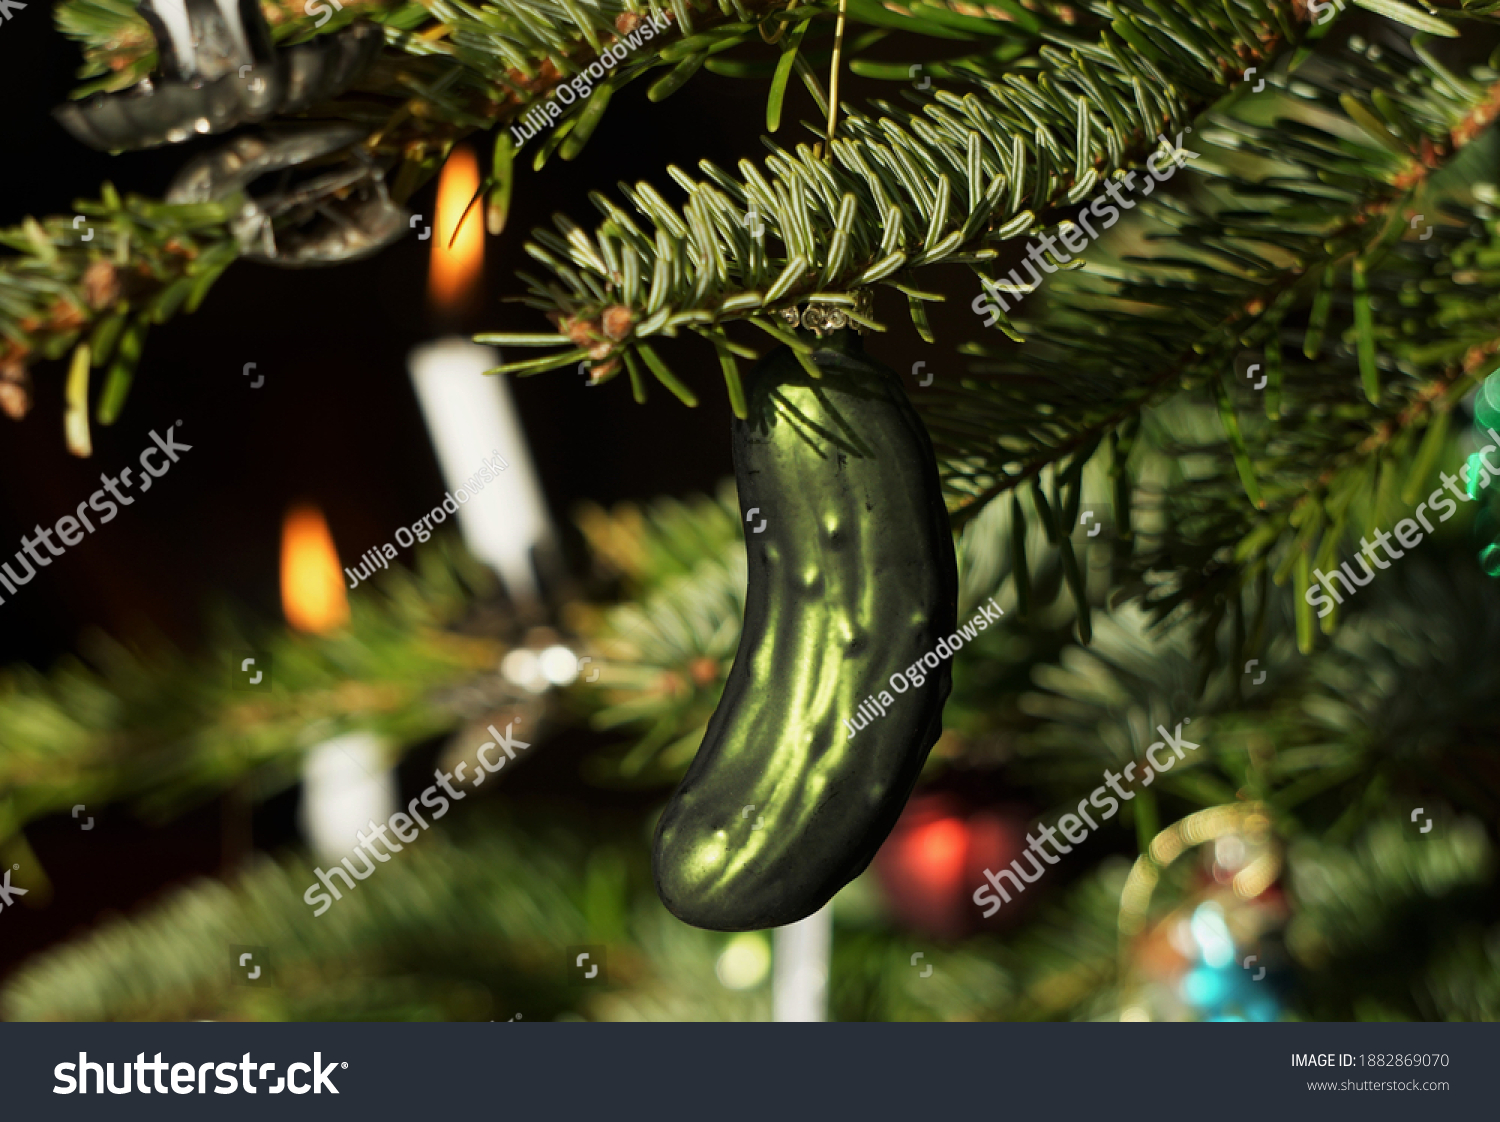 Decorated Christmas Tree With Hidden Glass Cucumber Decoration As Lucky Symbol And White Wax Candles. Festive Green Background. #1882869070